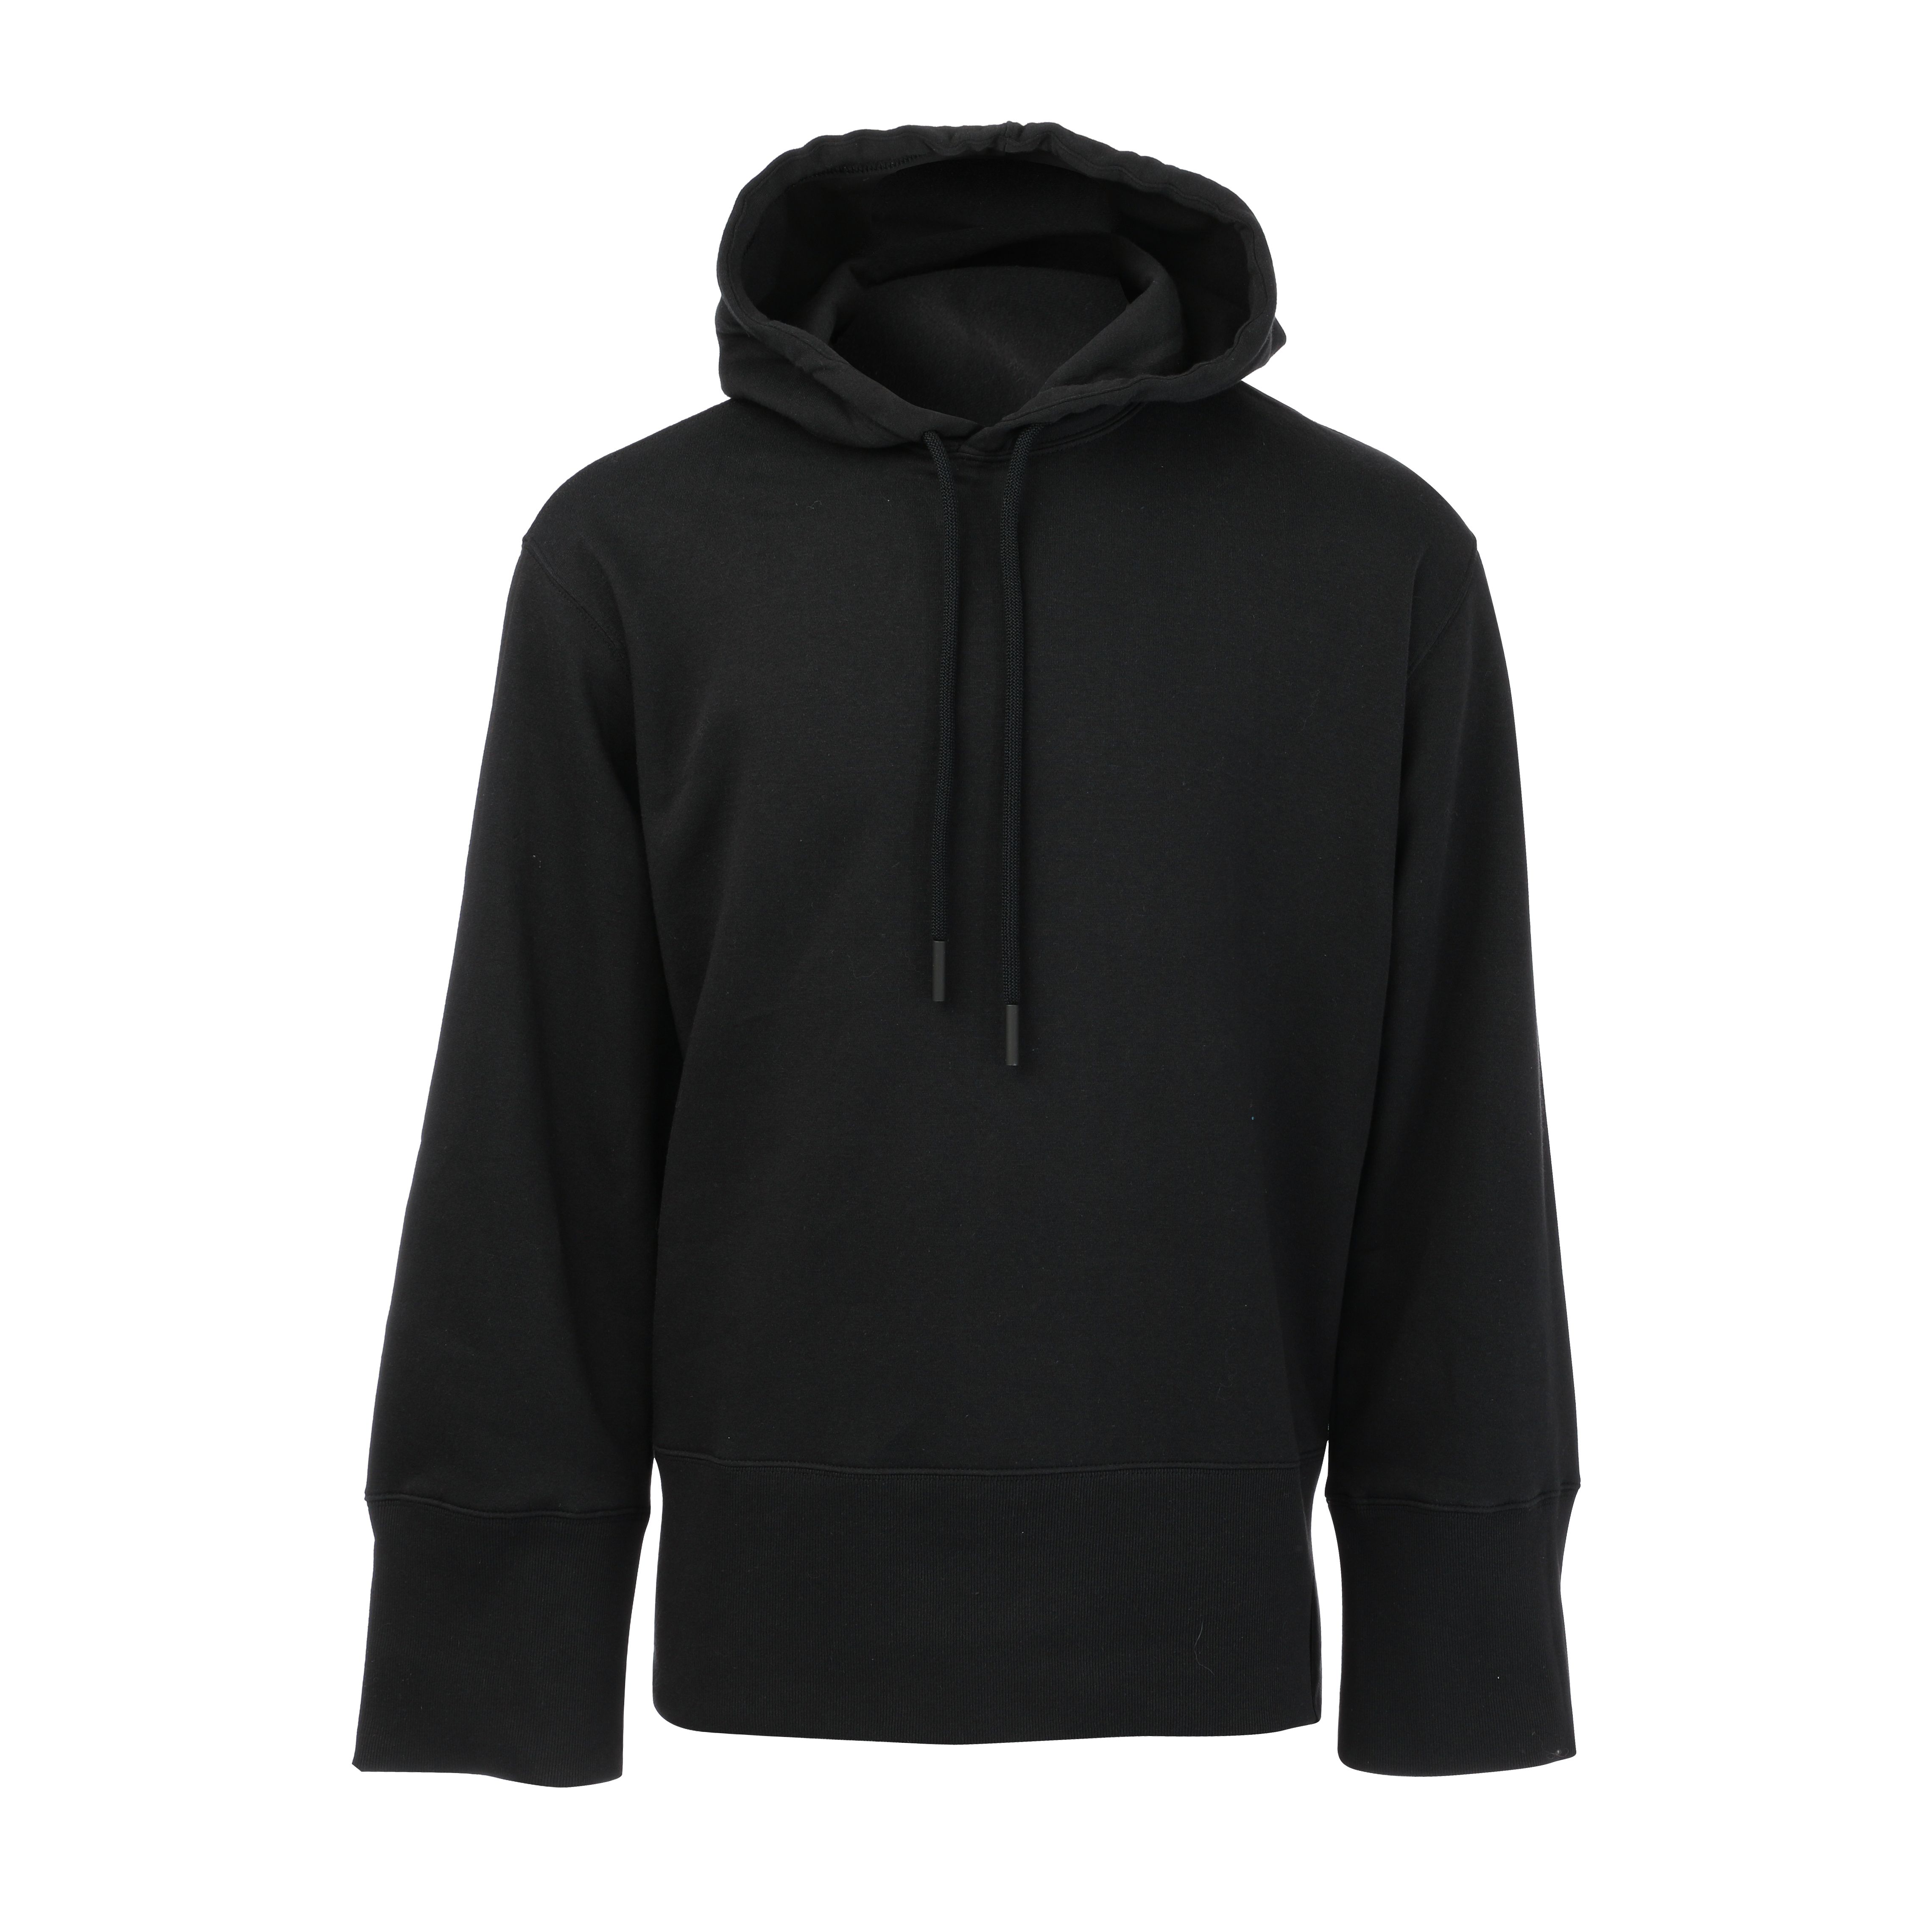 Mens Comfy and Chill Fleece Hoody